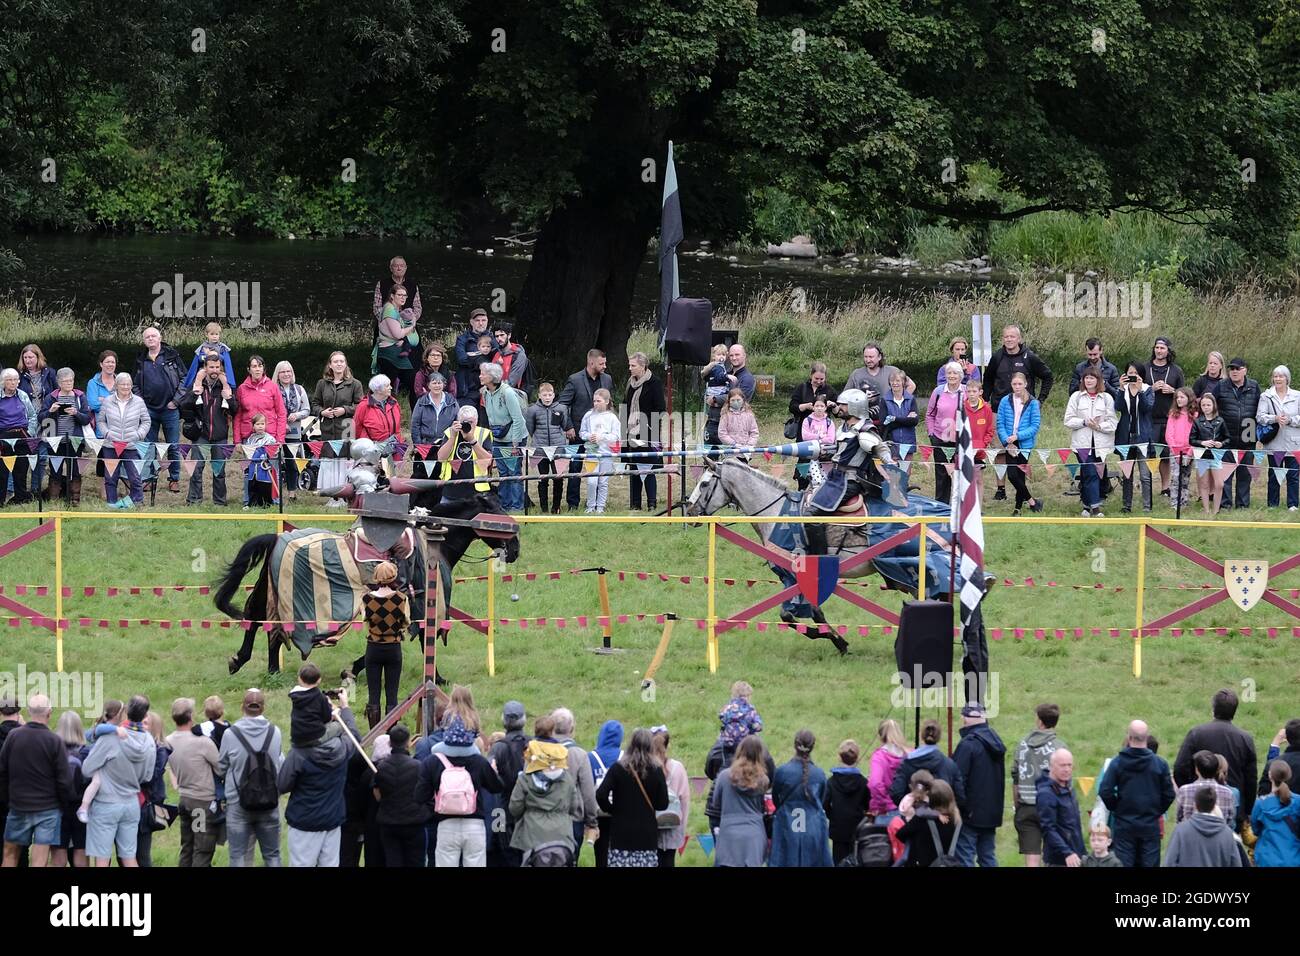 Melrose, UK, 15th August, 2021. Les Amis, jousting knights & horsemanship display from the medieval period, in tribute to Sir Walter Scotts 'Ivanhoe' The inaugural festival, ScottFest 2021, is being held at Abbotsford, ScottÕs home in the Scottish Borders, over the legendary authorÕs 250th birthday weekend, Saturday August 14th and Sunday August 15th. The event, funded this year by EventScotland, is based on Ivanhoe and will feature jousting, stunt horse riding, living history displays, falconry and traditional crafts, plus archery, live music and Scottish dancing. Rob Gray Stock Photo